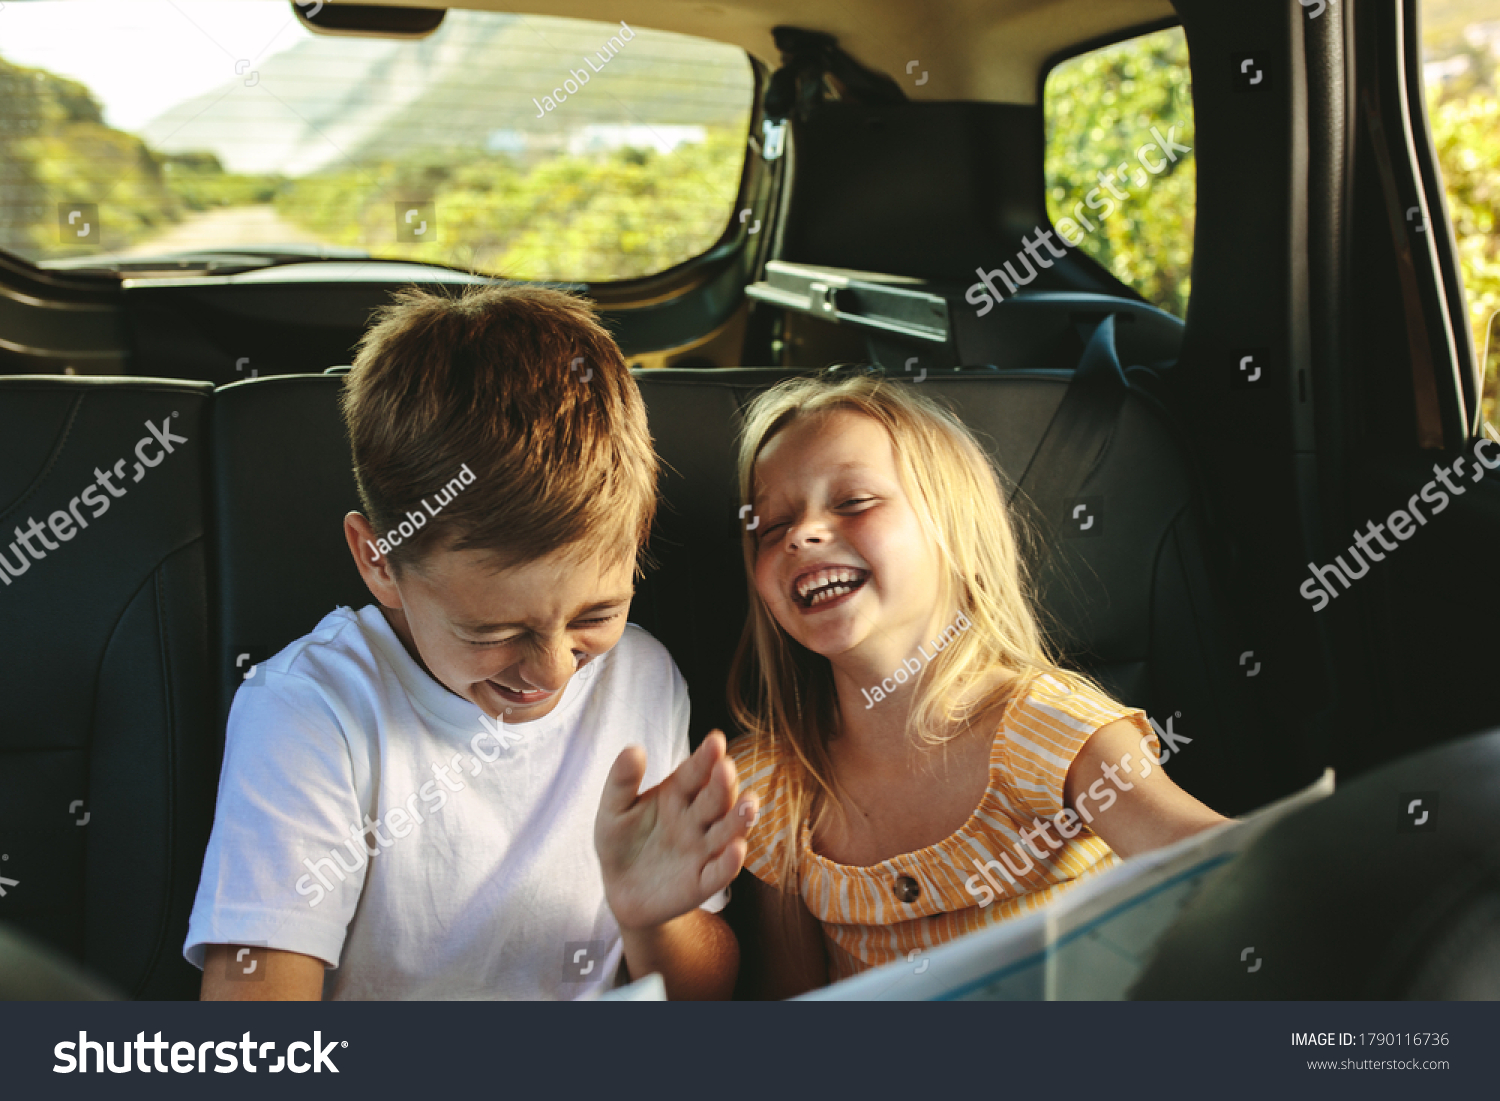 Siblings sitting on backseat of car looking at map and smiling. Kids traveling in a car on roadtrip playing with a map. #1790116736